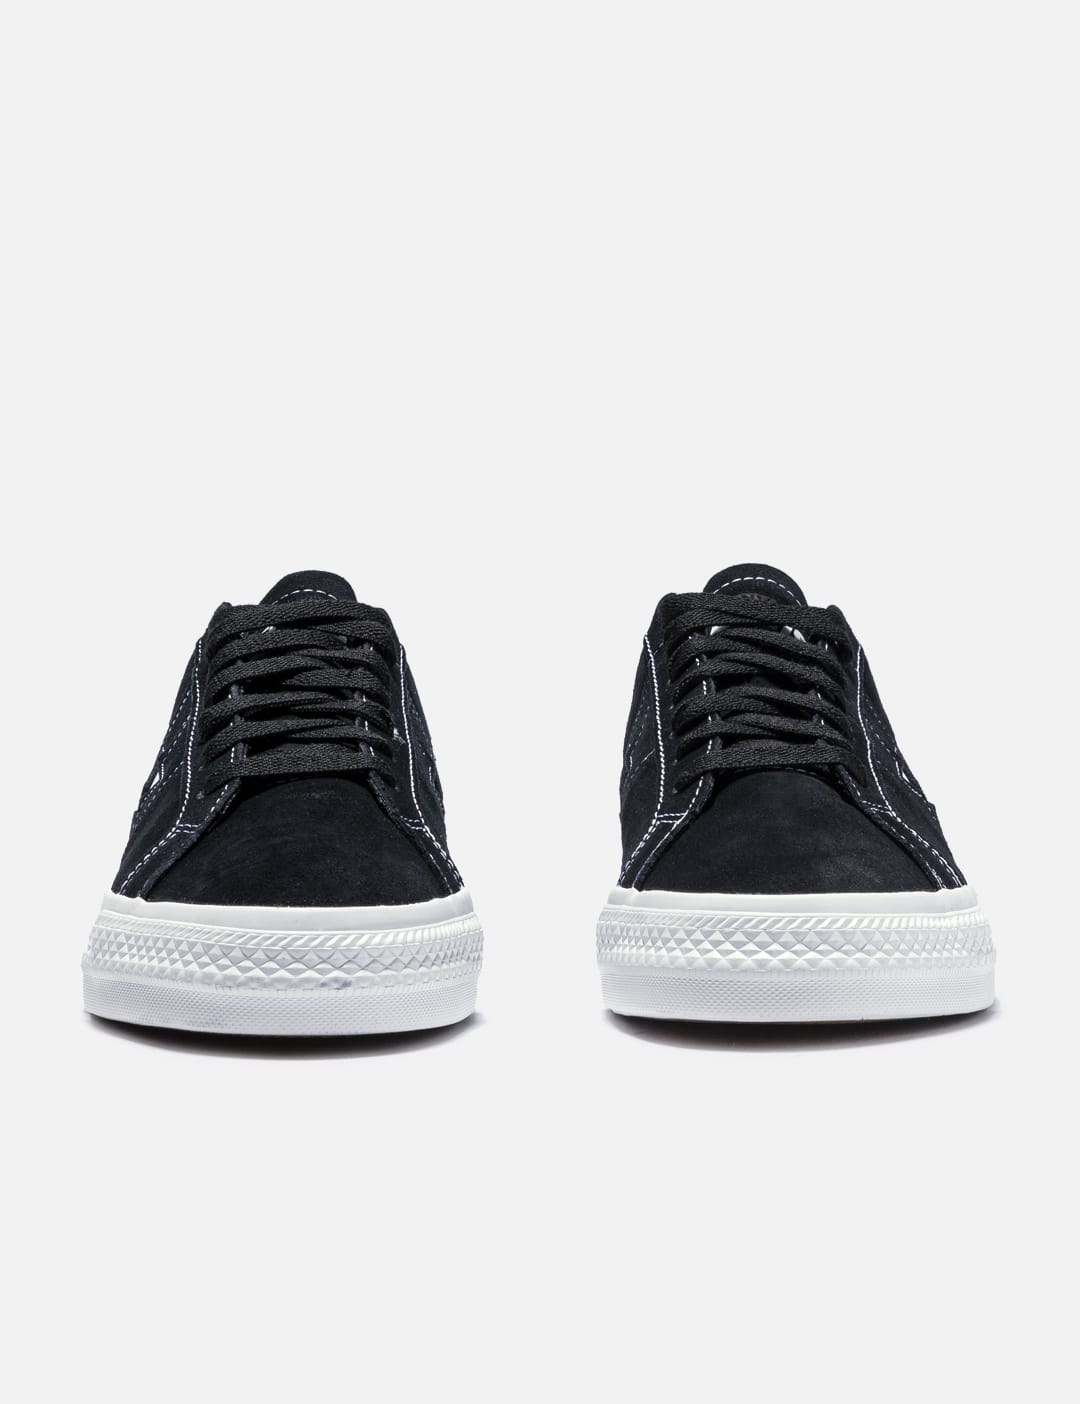 Converse - CONS One Star Pro Suede | HBX - Globally Curated